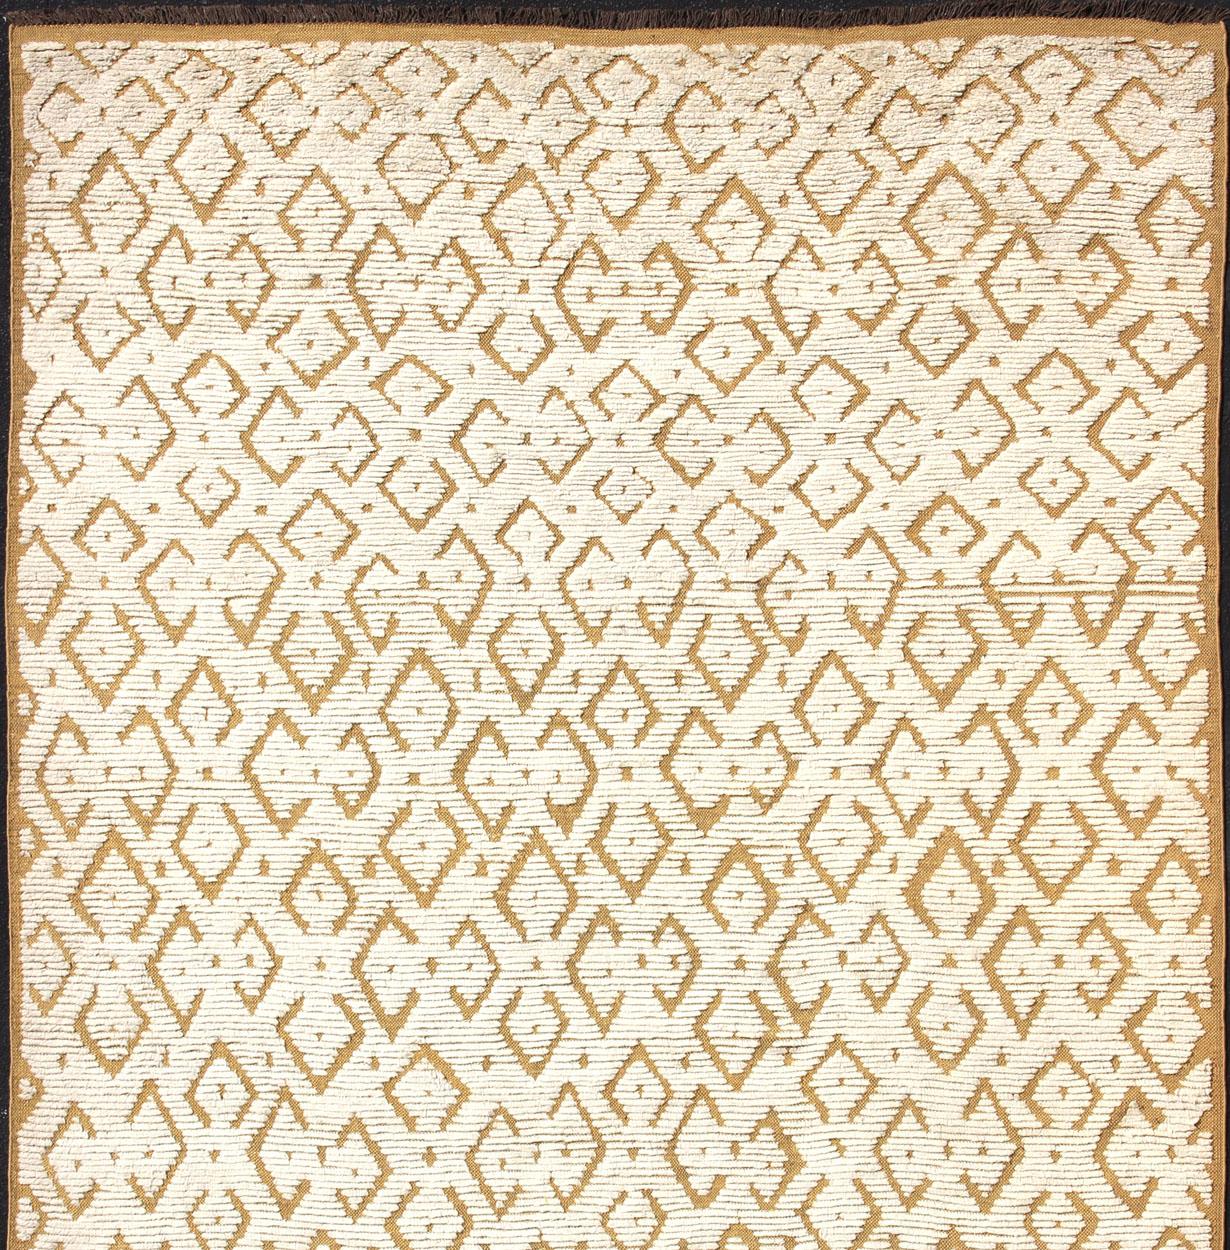 Large Modern Hand-Knotted Rug in Wool with Diamond Design in Marigold and Cream In Excellent Condition For Sale In Atlanta, GA